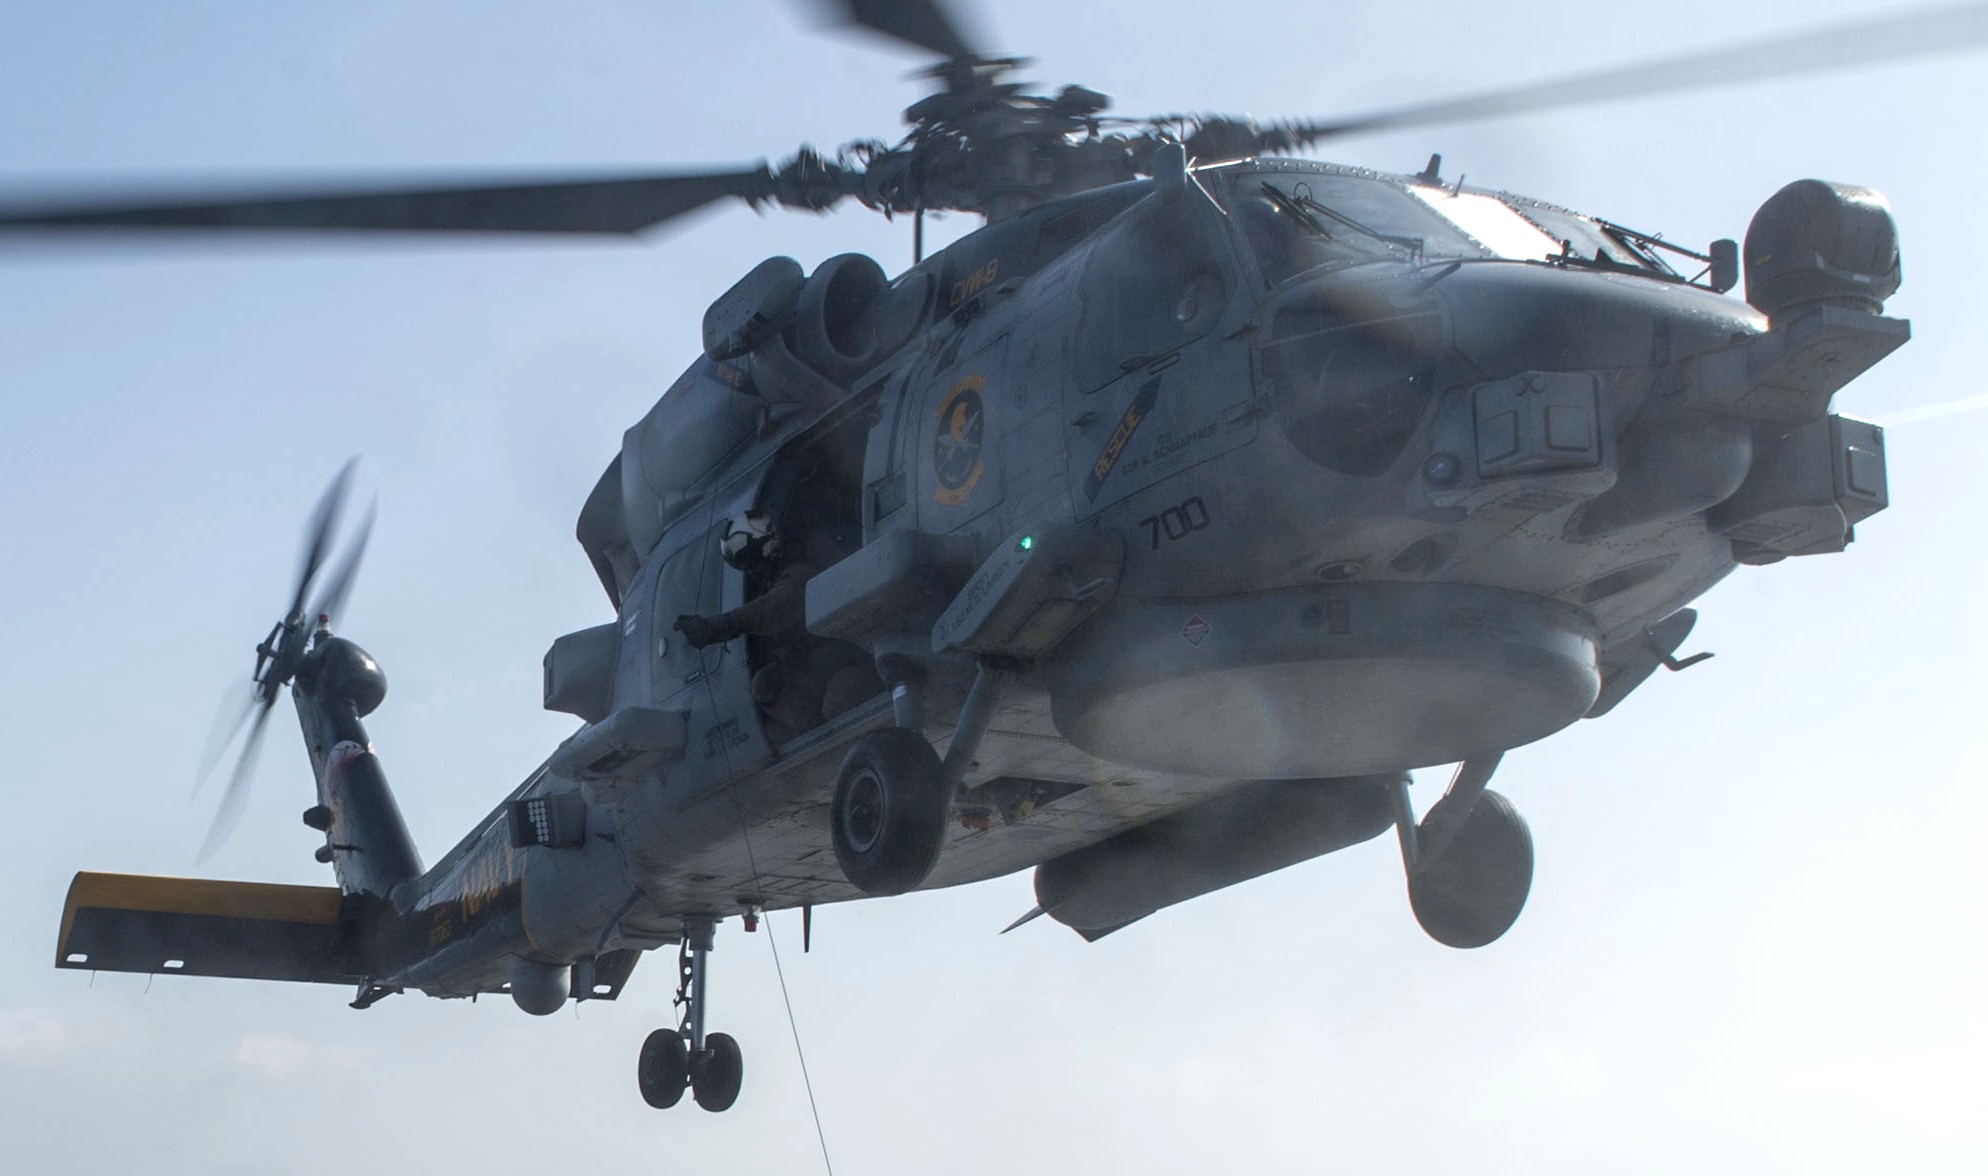 hsm-70 spartans helicopter maritime strike squadron mh-60r seahawk 2014 111